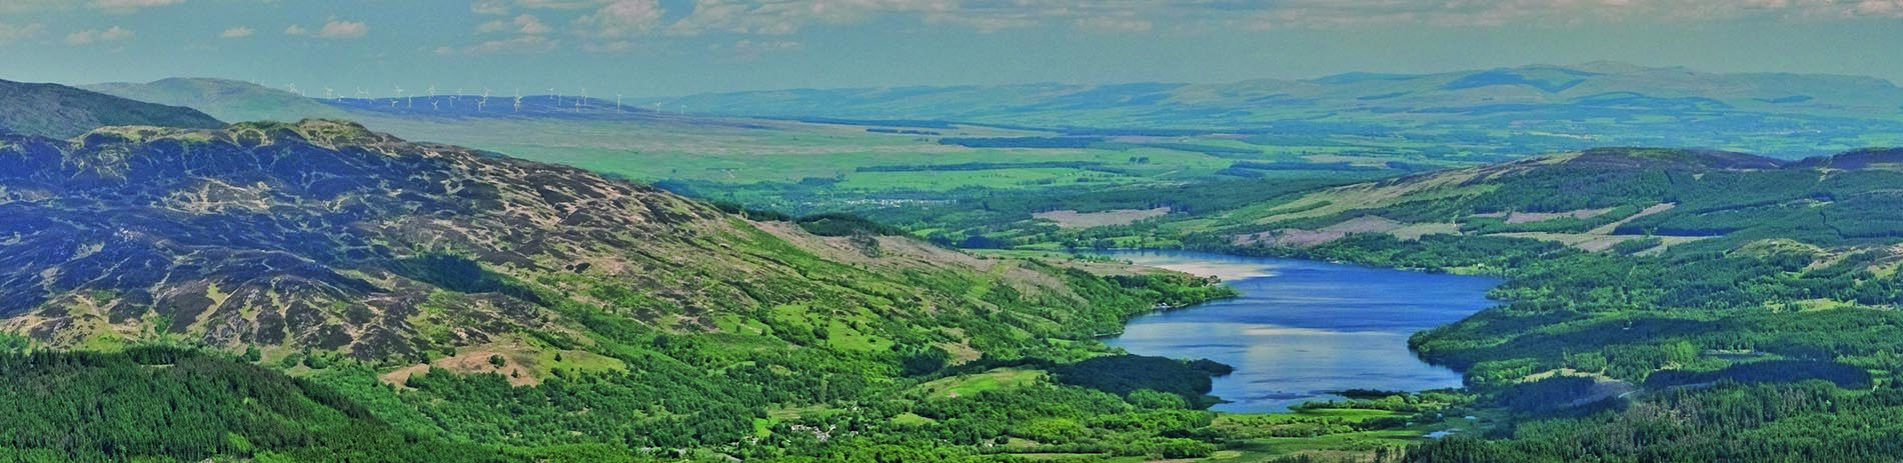 very green-landscape-of-trossachs-mountains-and-loch-venachar-on-the-right